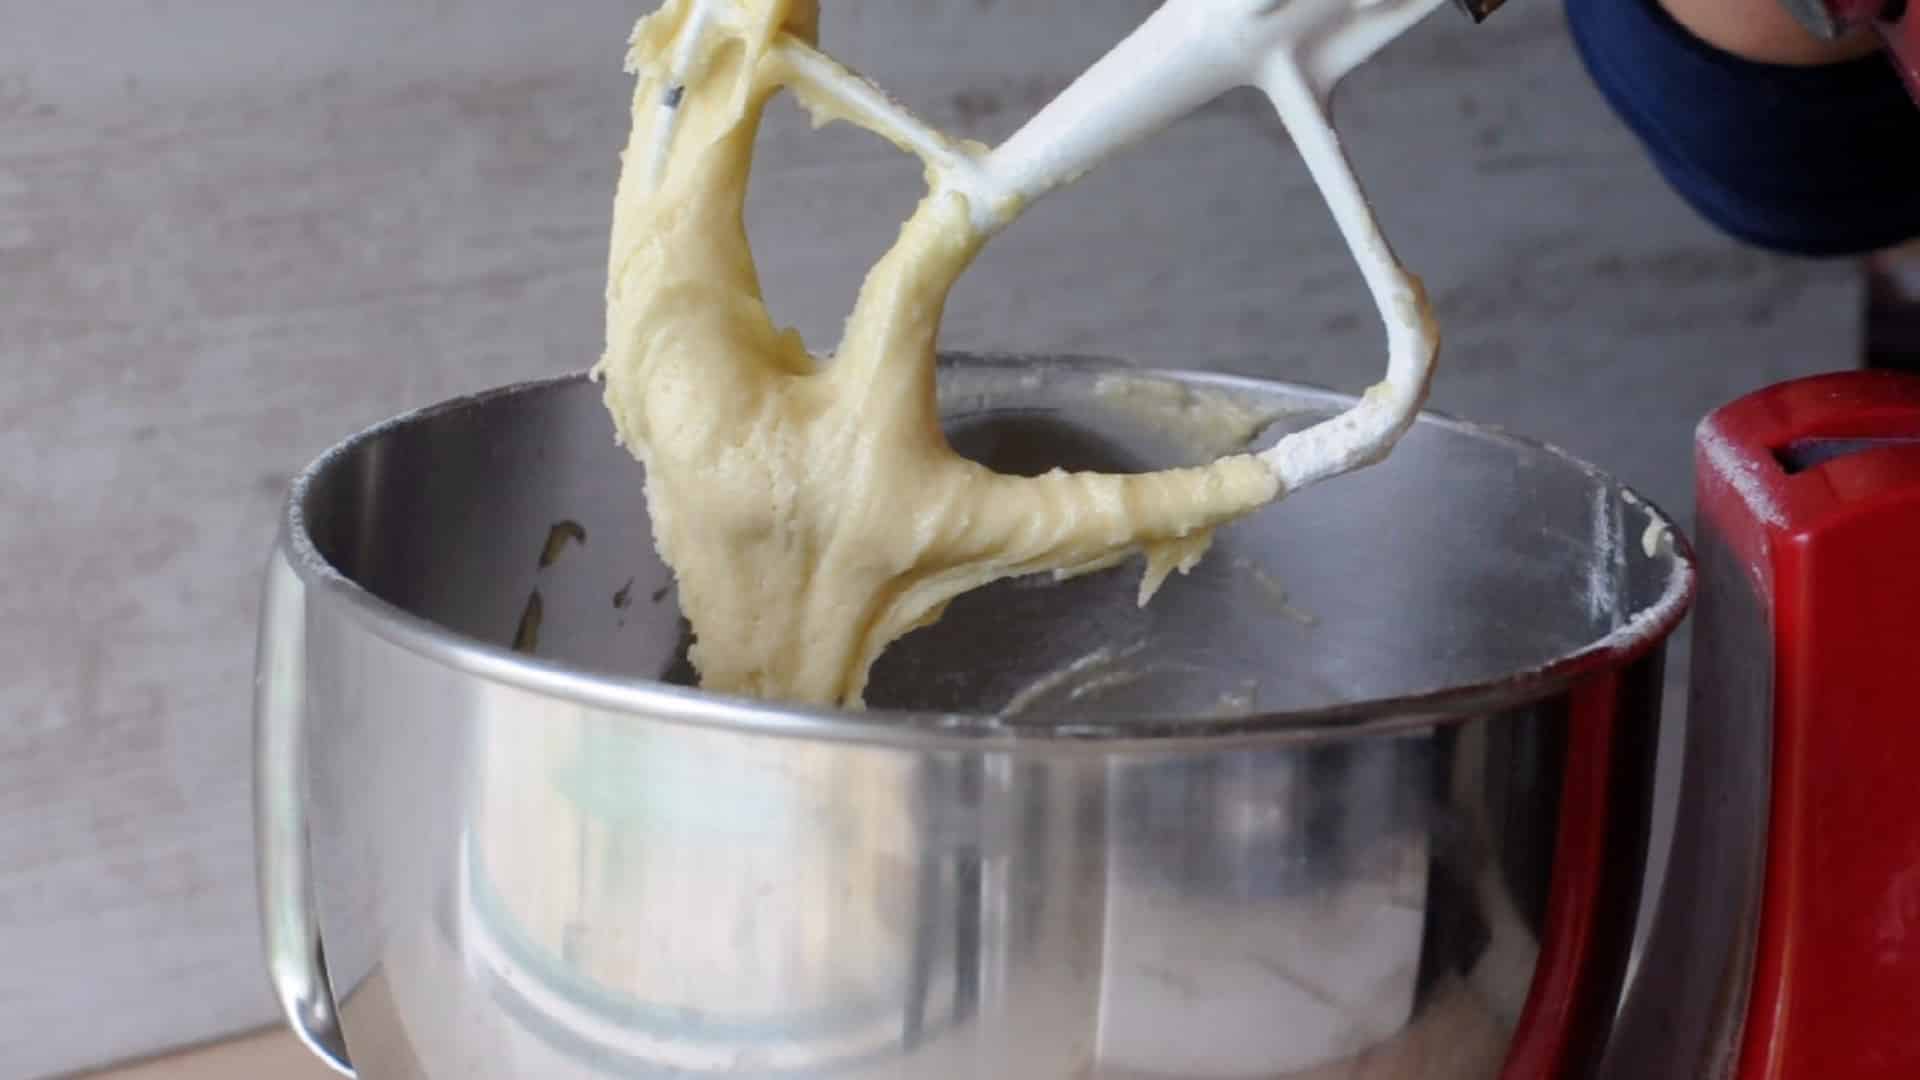 What the vanilla batter looks like hanging from the mixer blade